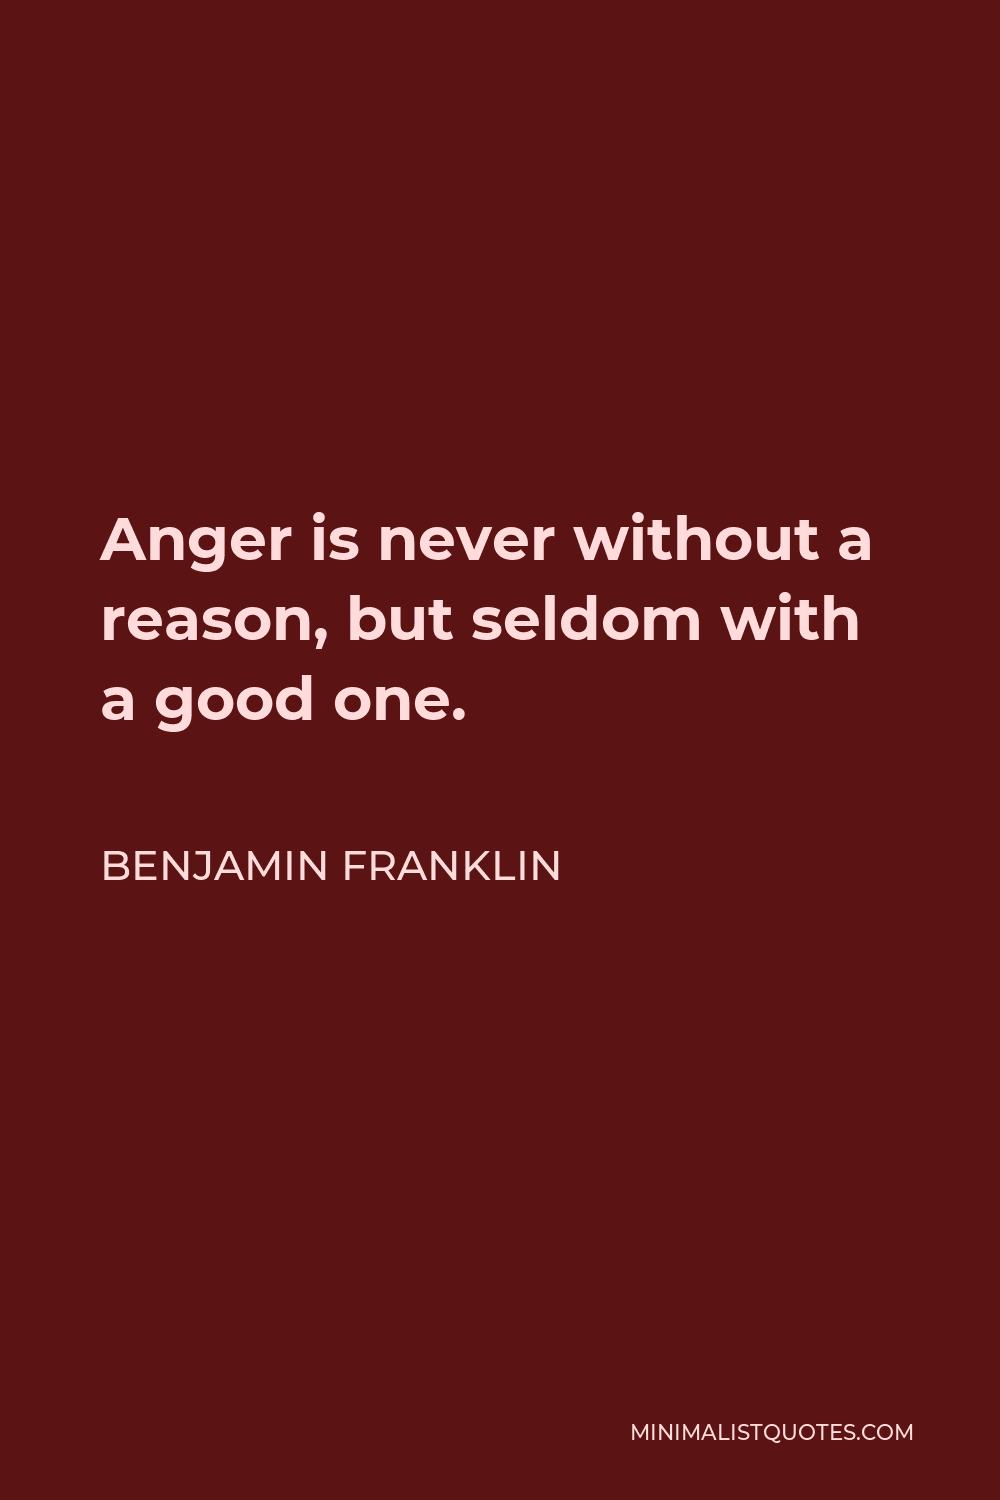 Benjamin Franklin Quote - Anger is never without a reason, but seldom with a good one.